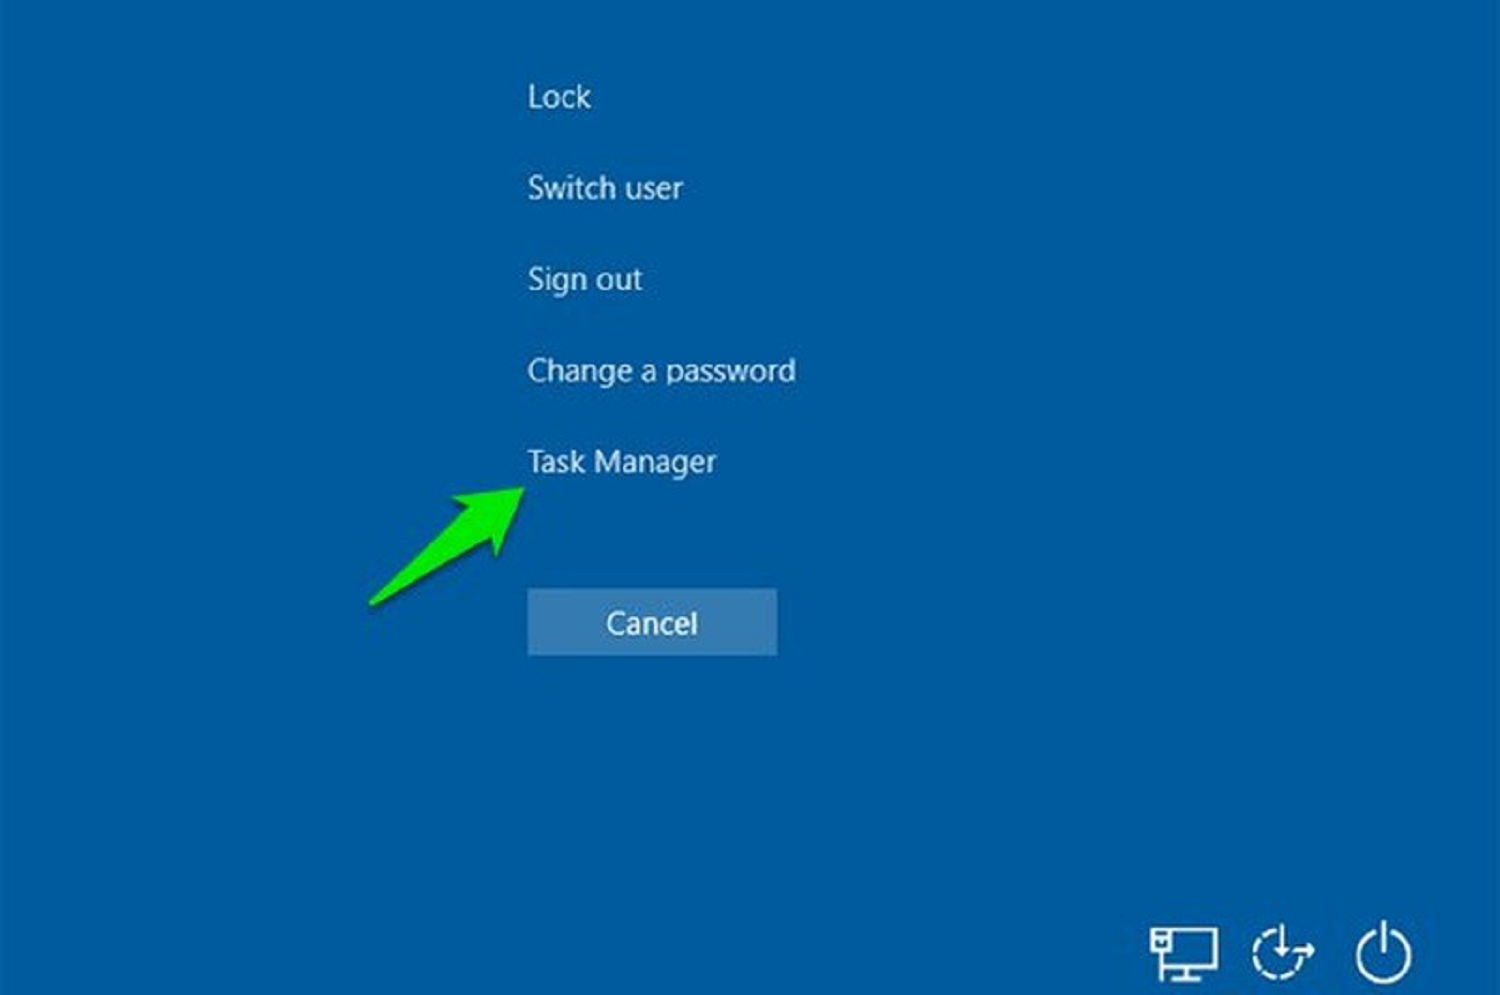 the task manager